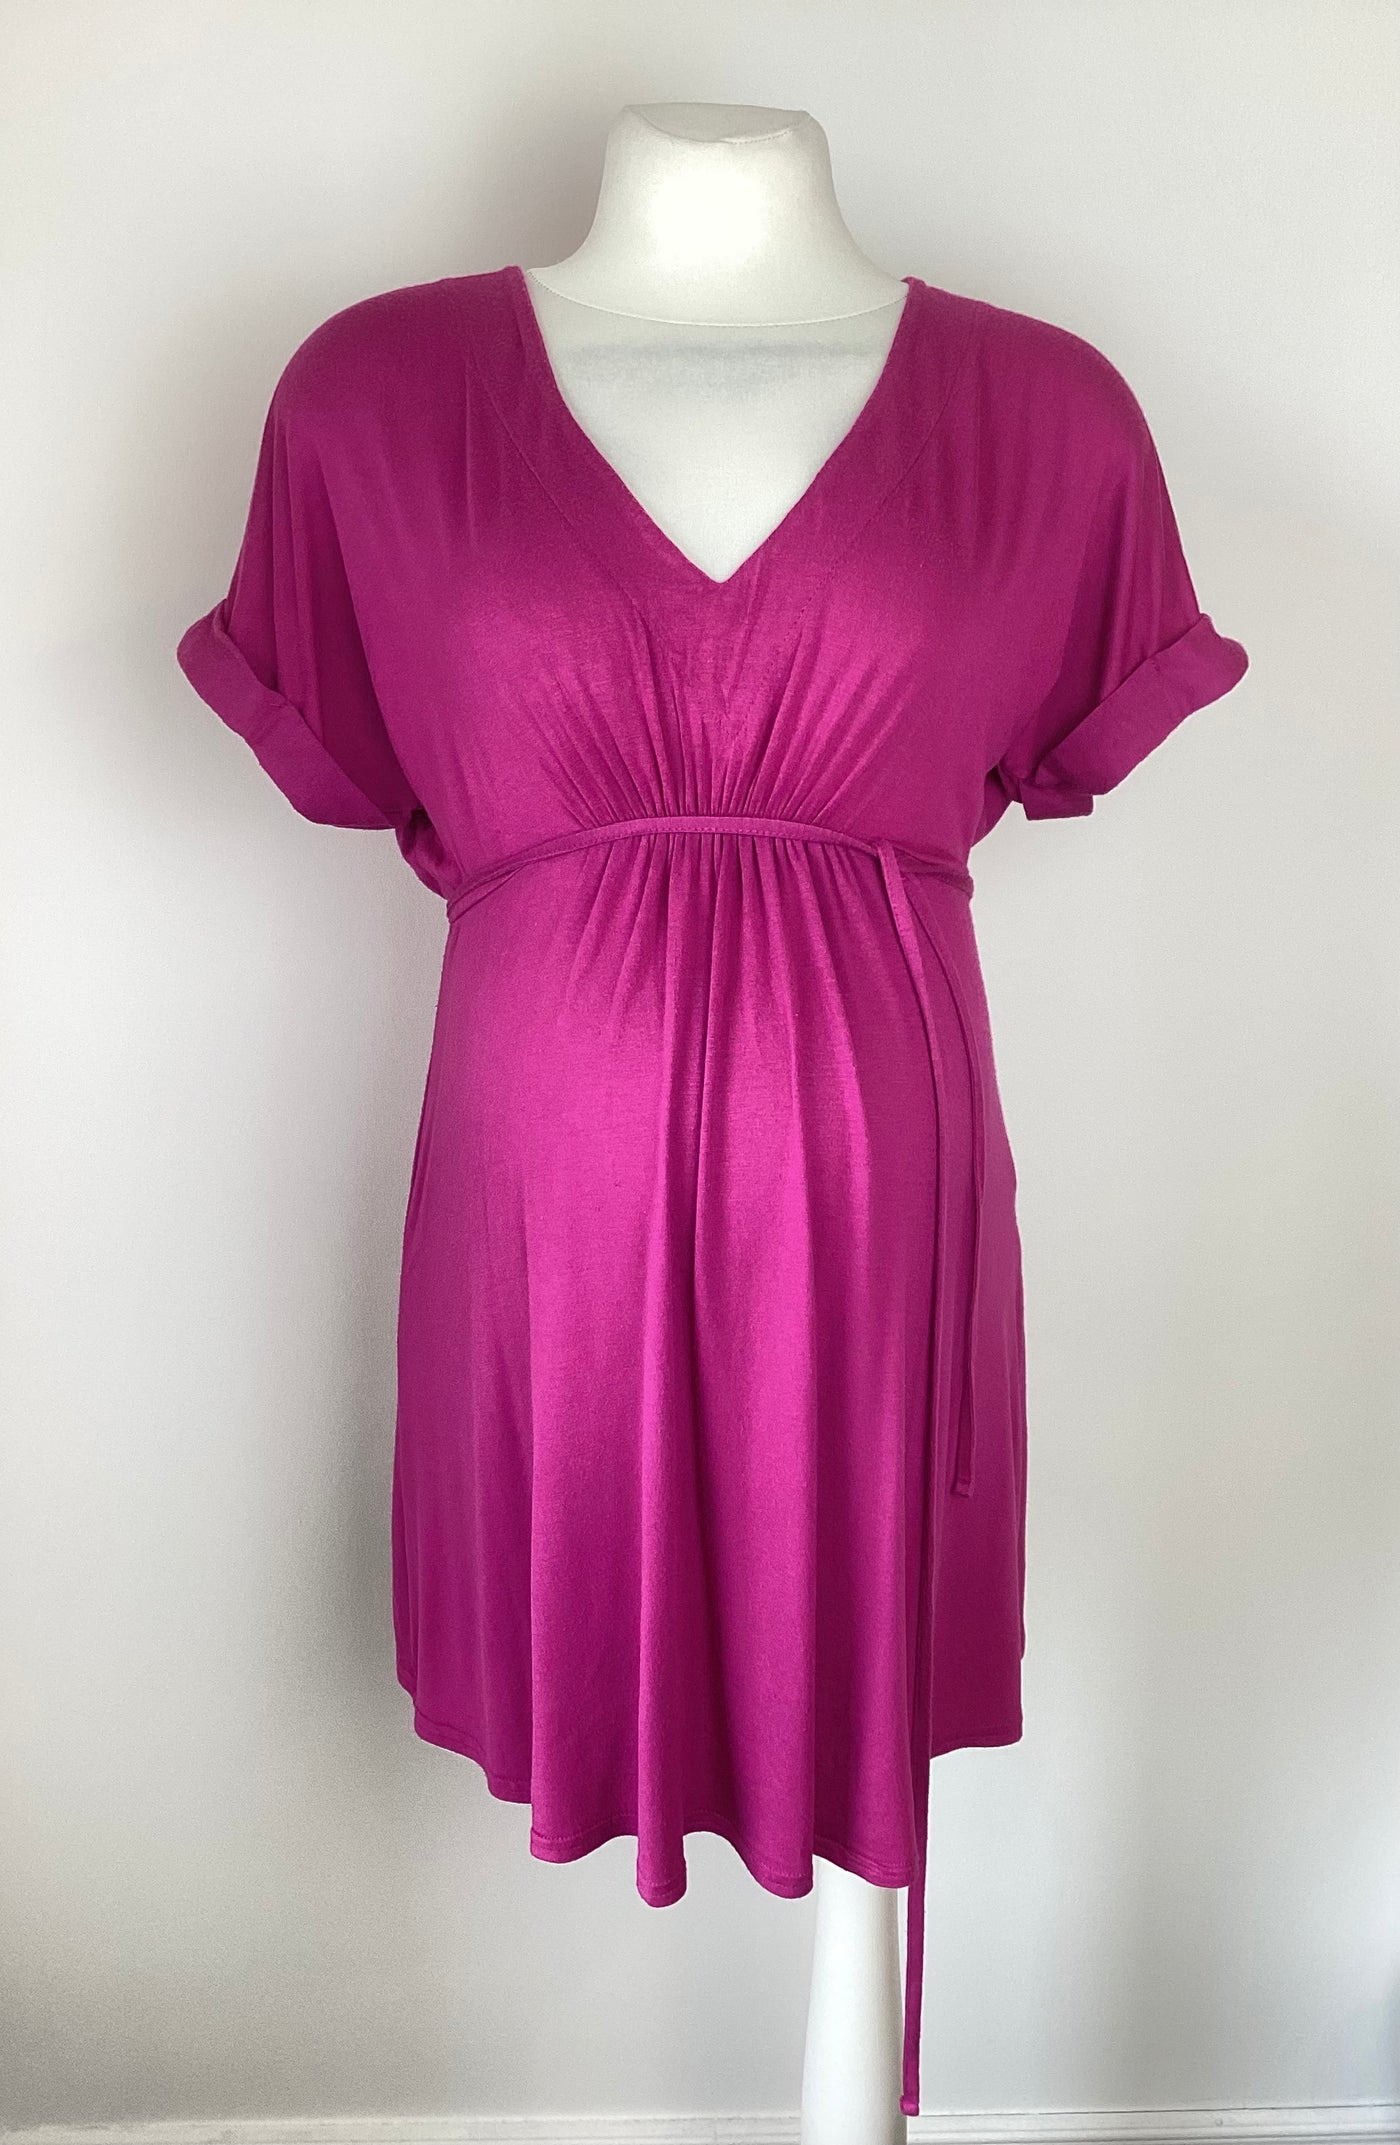 New Look Maternity cerise pink short sleeved top with waist tie - Size 8